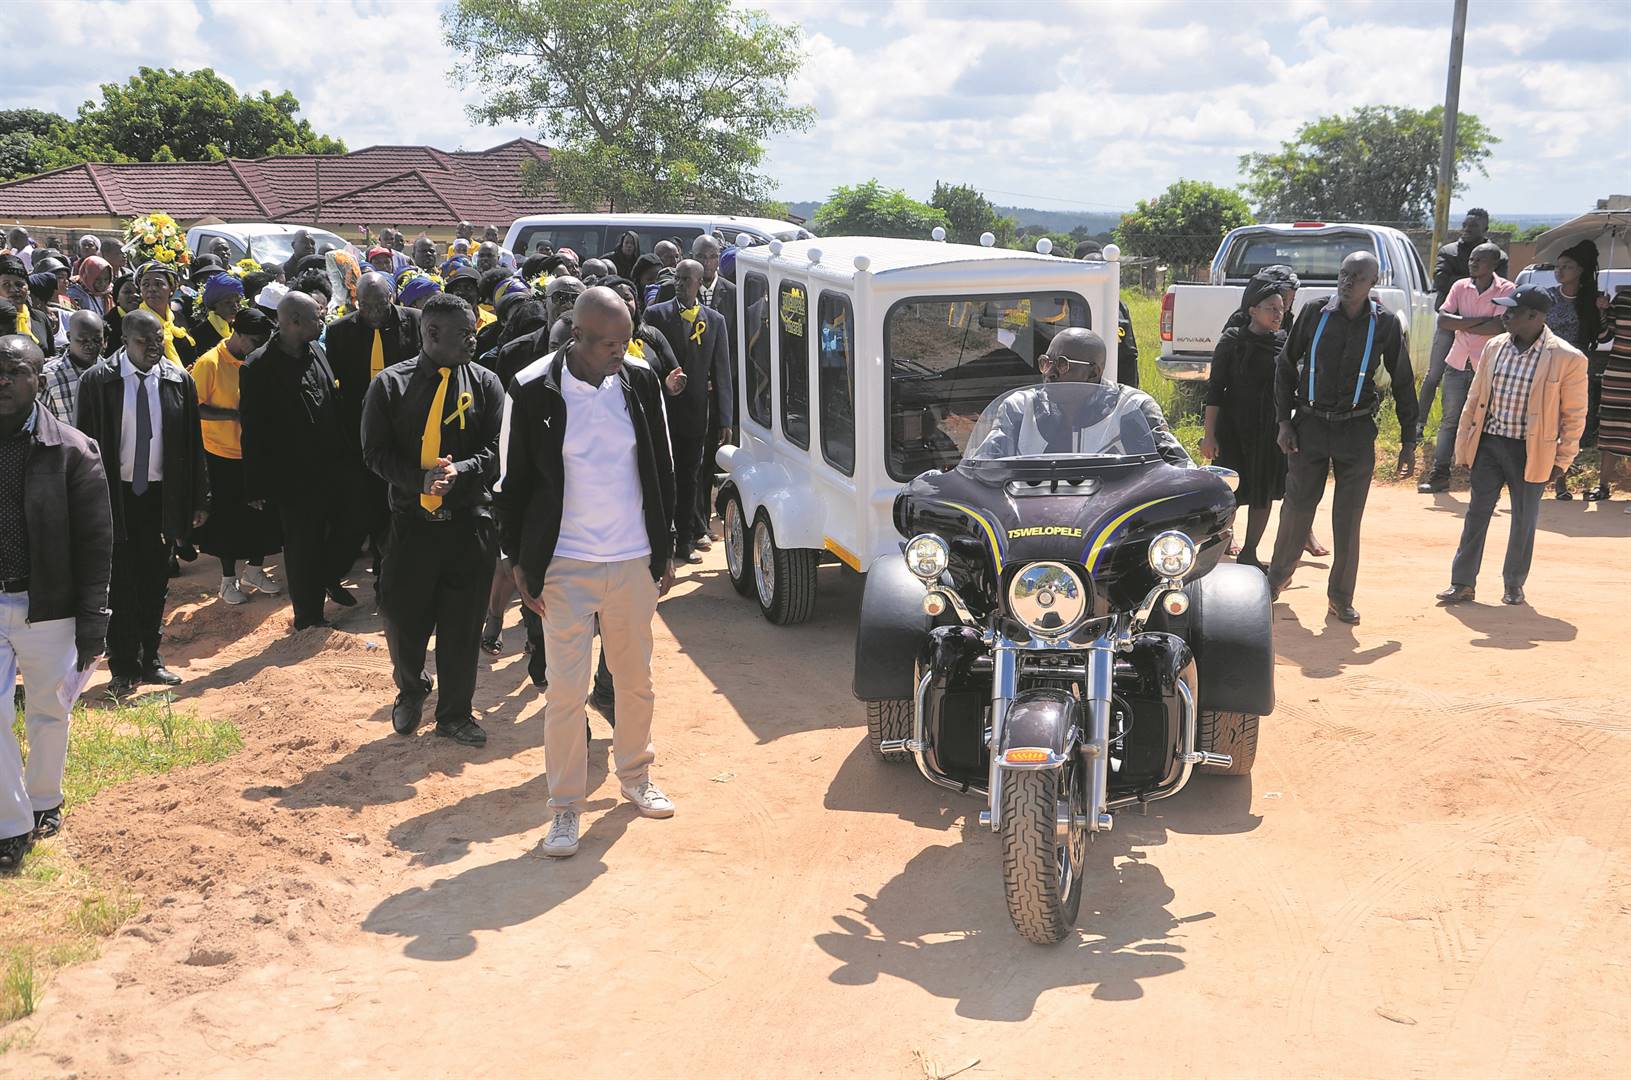 Tswelopele Funerals’ driver Albert Mnisi, who was killed when he and his colleague were shot by thugs, was laid to rest on Sunday.